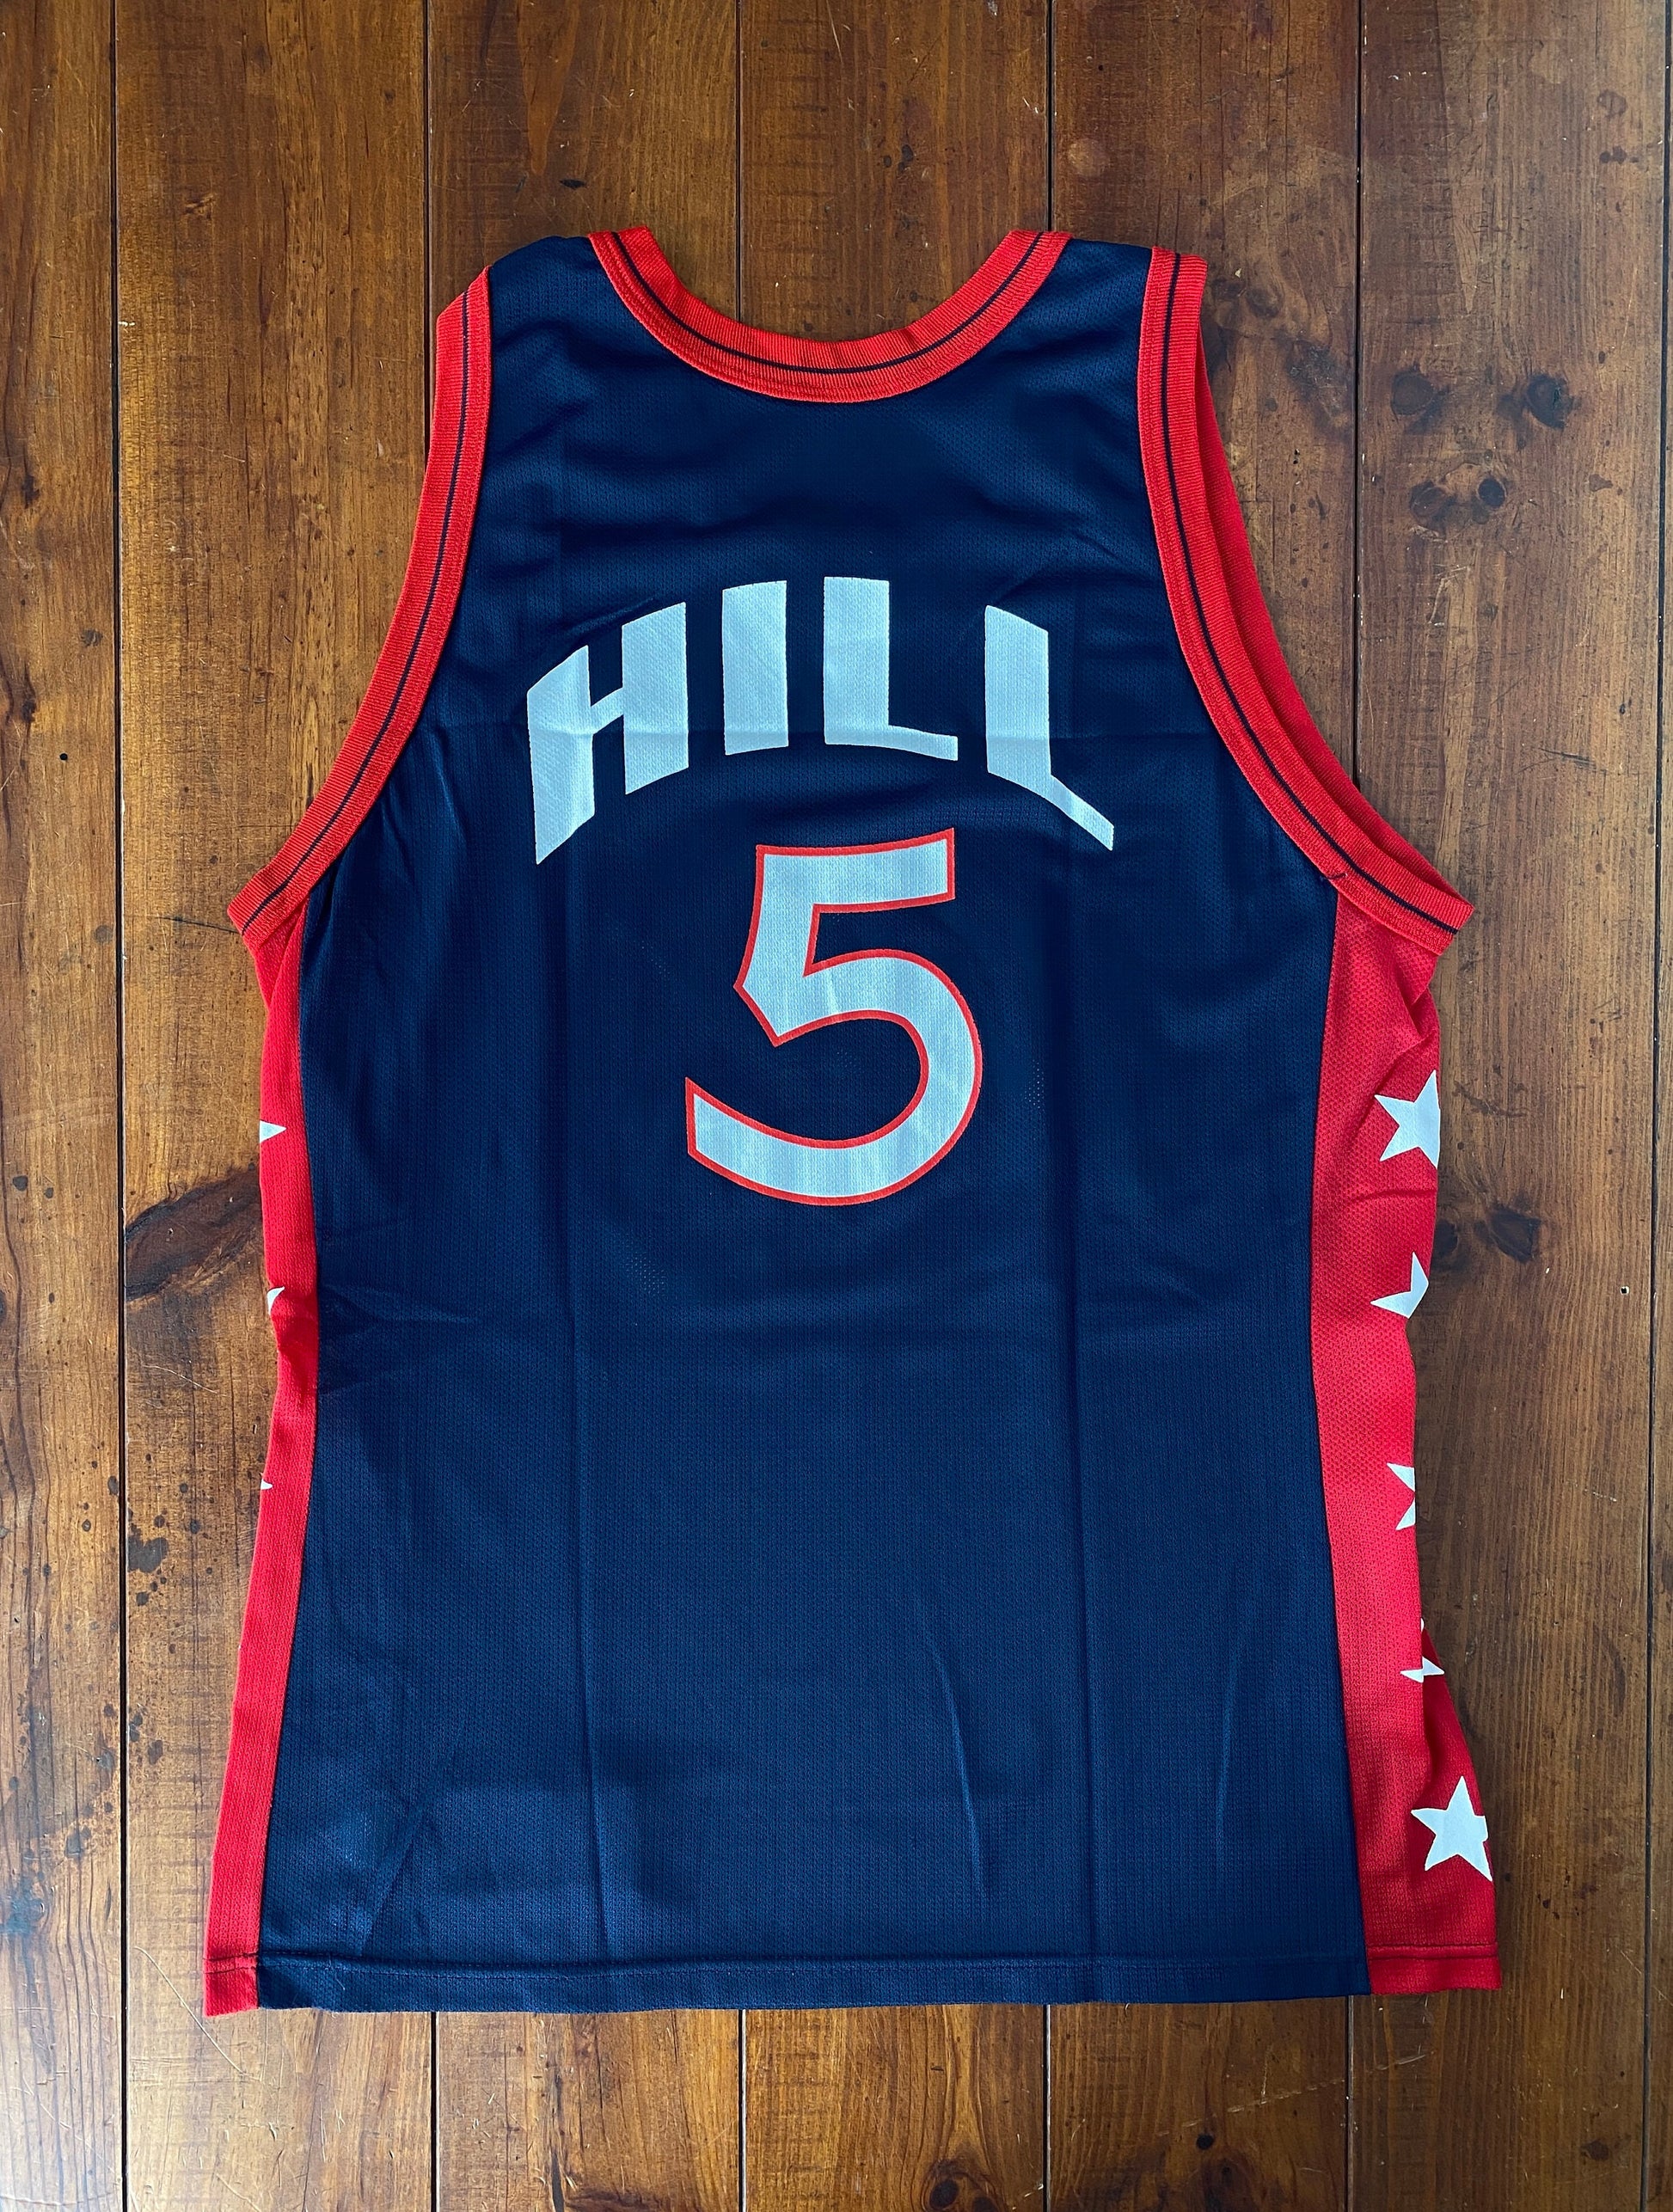 Grant Hill #5 Vintage Jersey, Dream Team Olympic Champion NBA Jersey, Size 48, Made in USA, Authentic NBA Jersey, Sports Memorabilia, Basketball Apparel